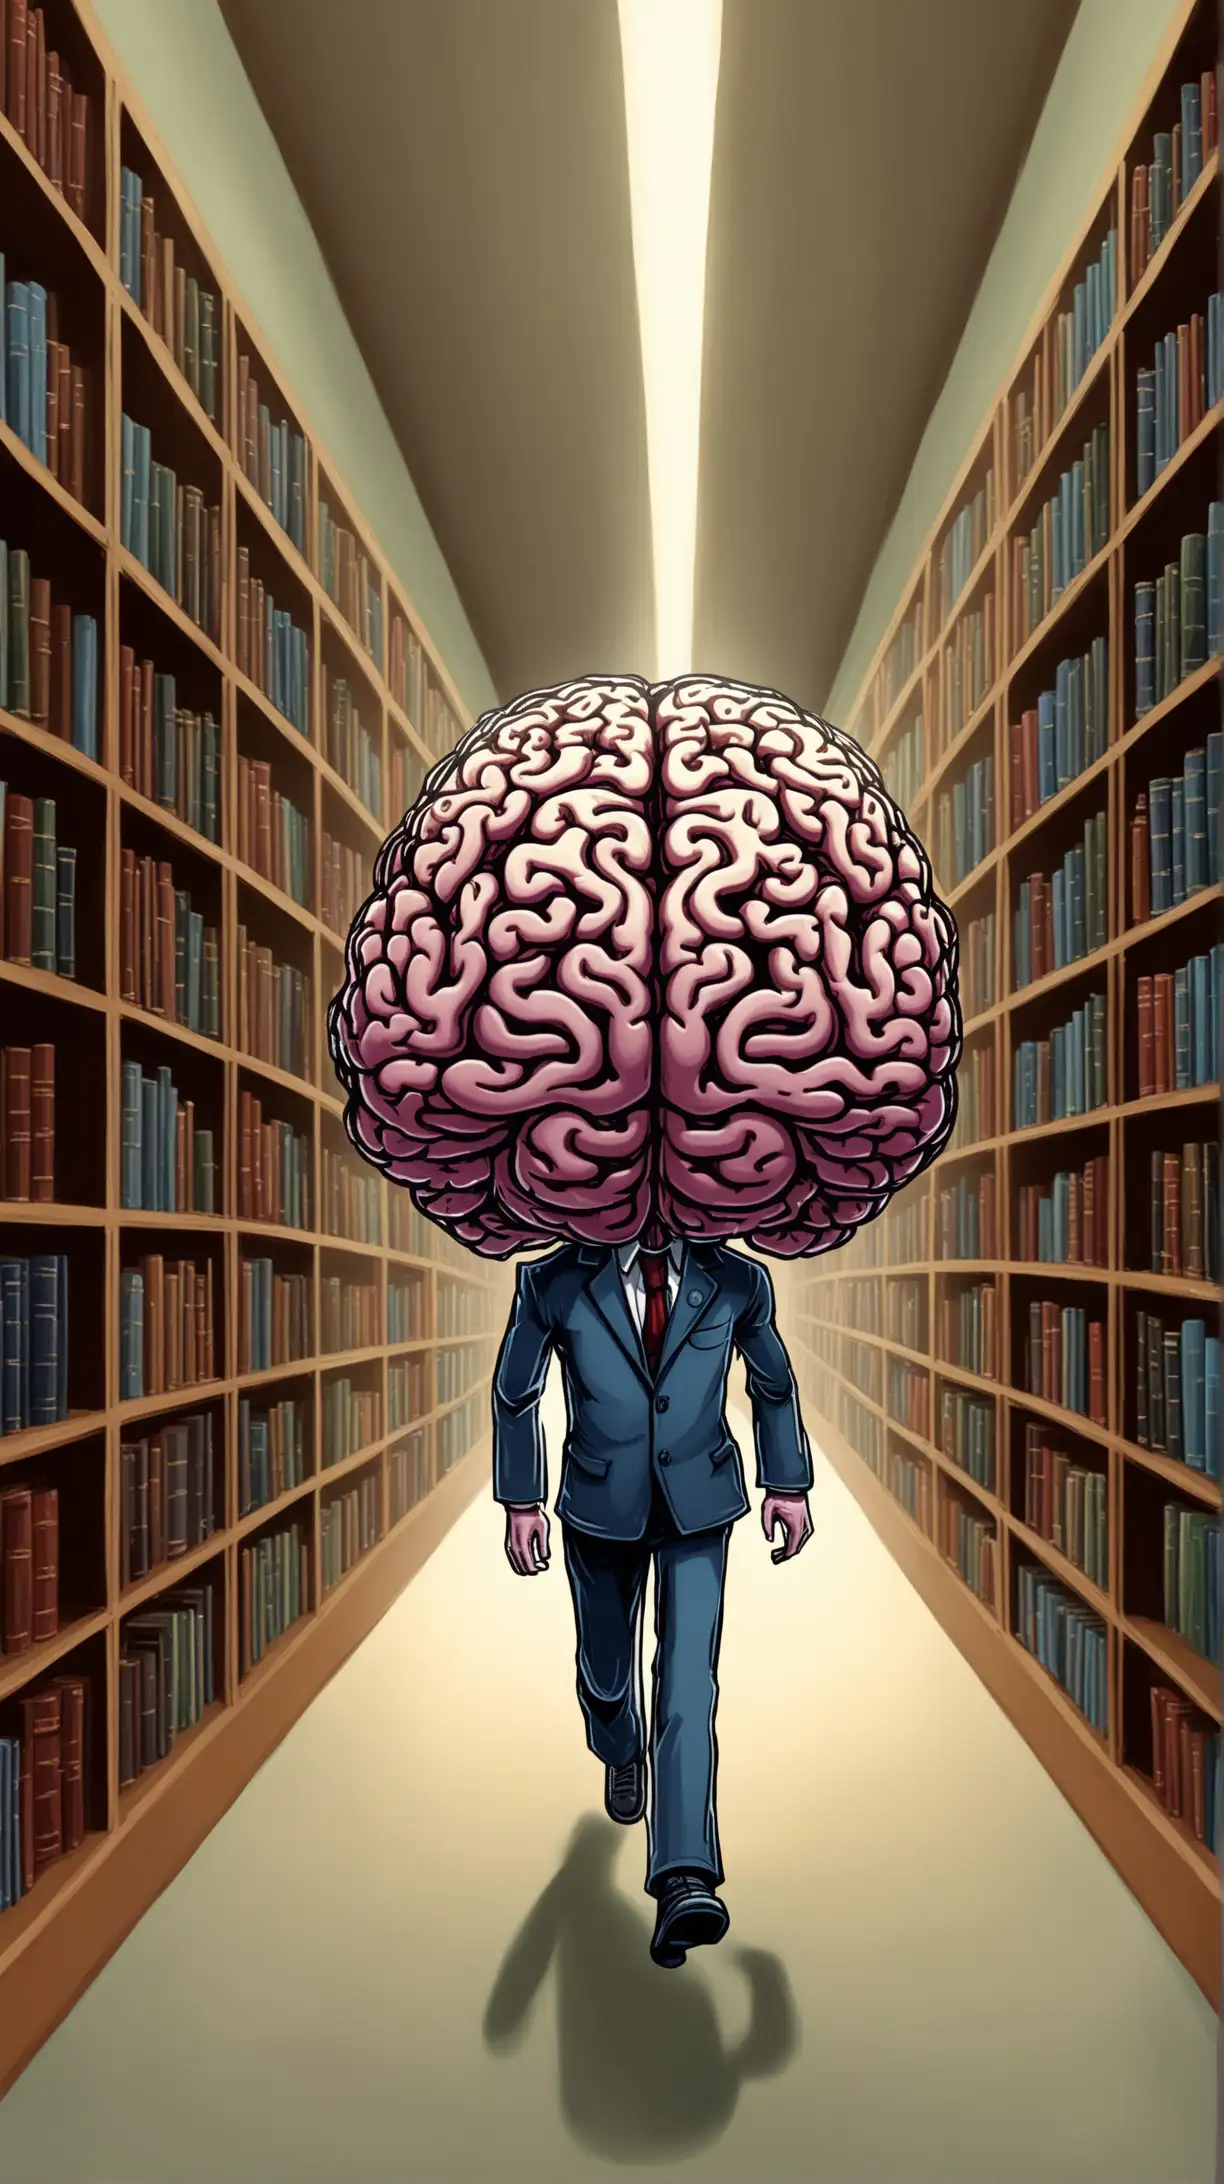 an anthropomorphic brain with sof feautures with arms and legs walking down the hallway of what looks like a library. he is actually inside a brain taking mental inventory of thoughts, mindset, habits and beliefs. show me he is inside the brain walking around like it is a liary